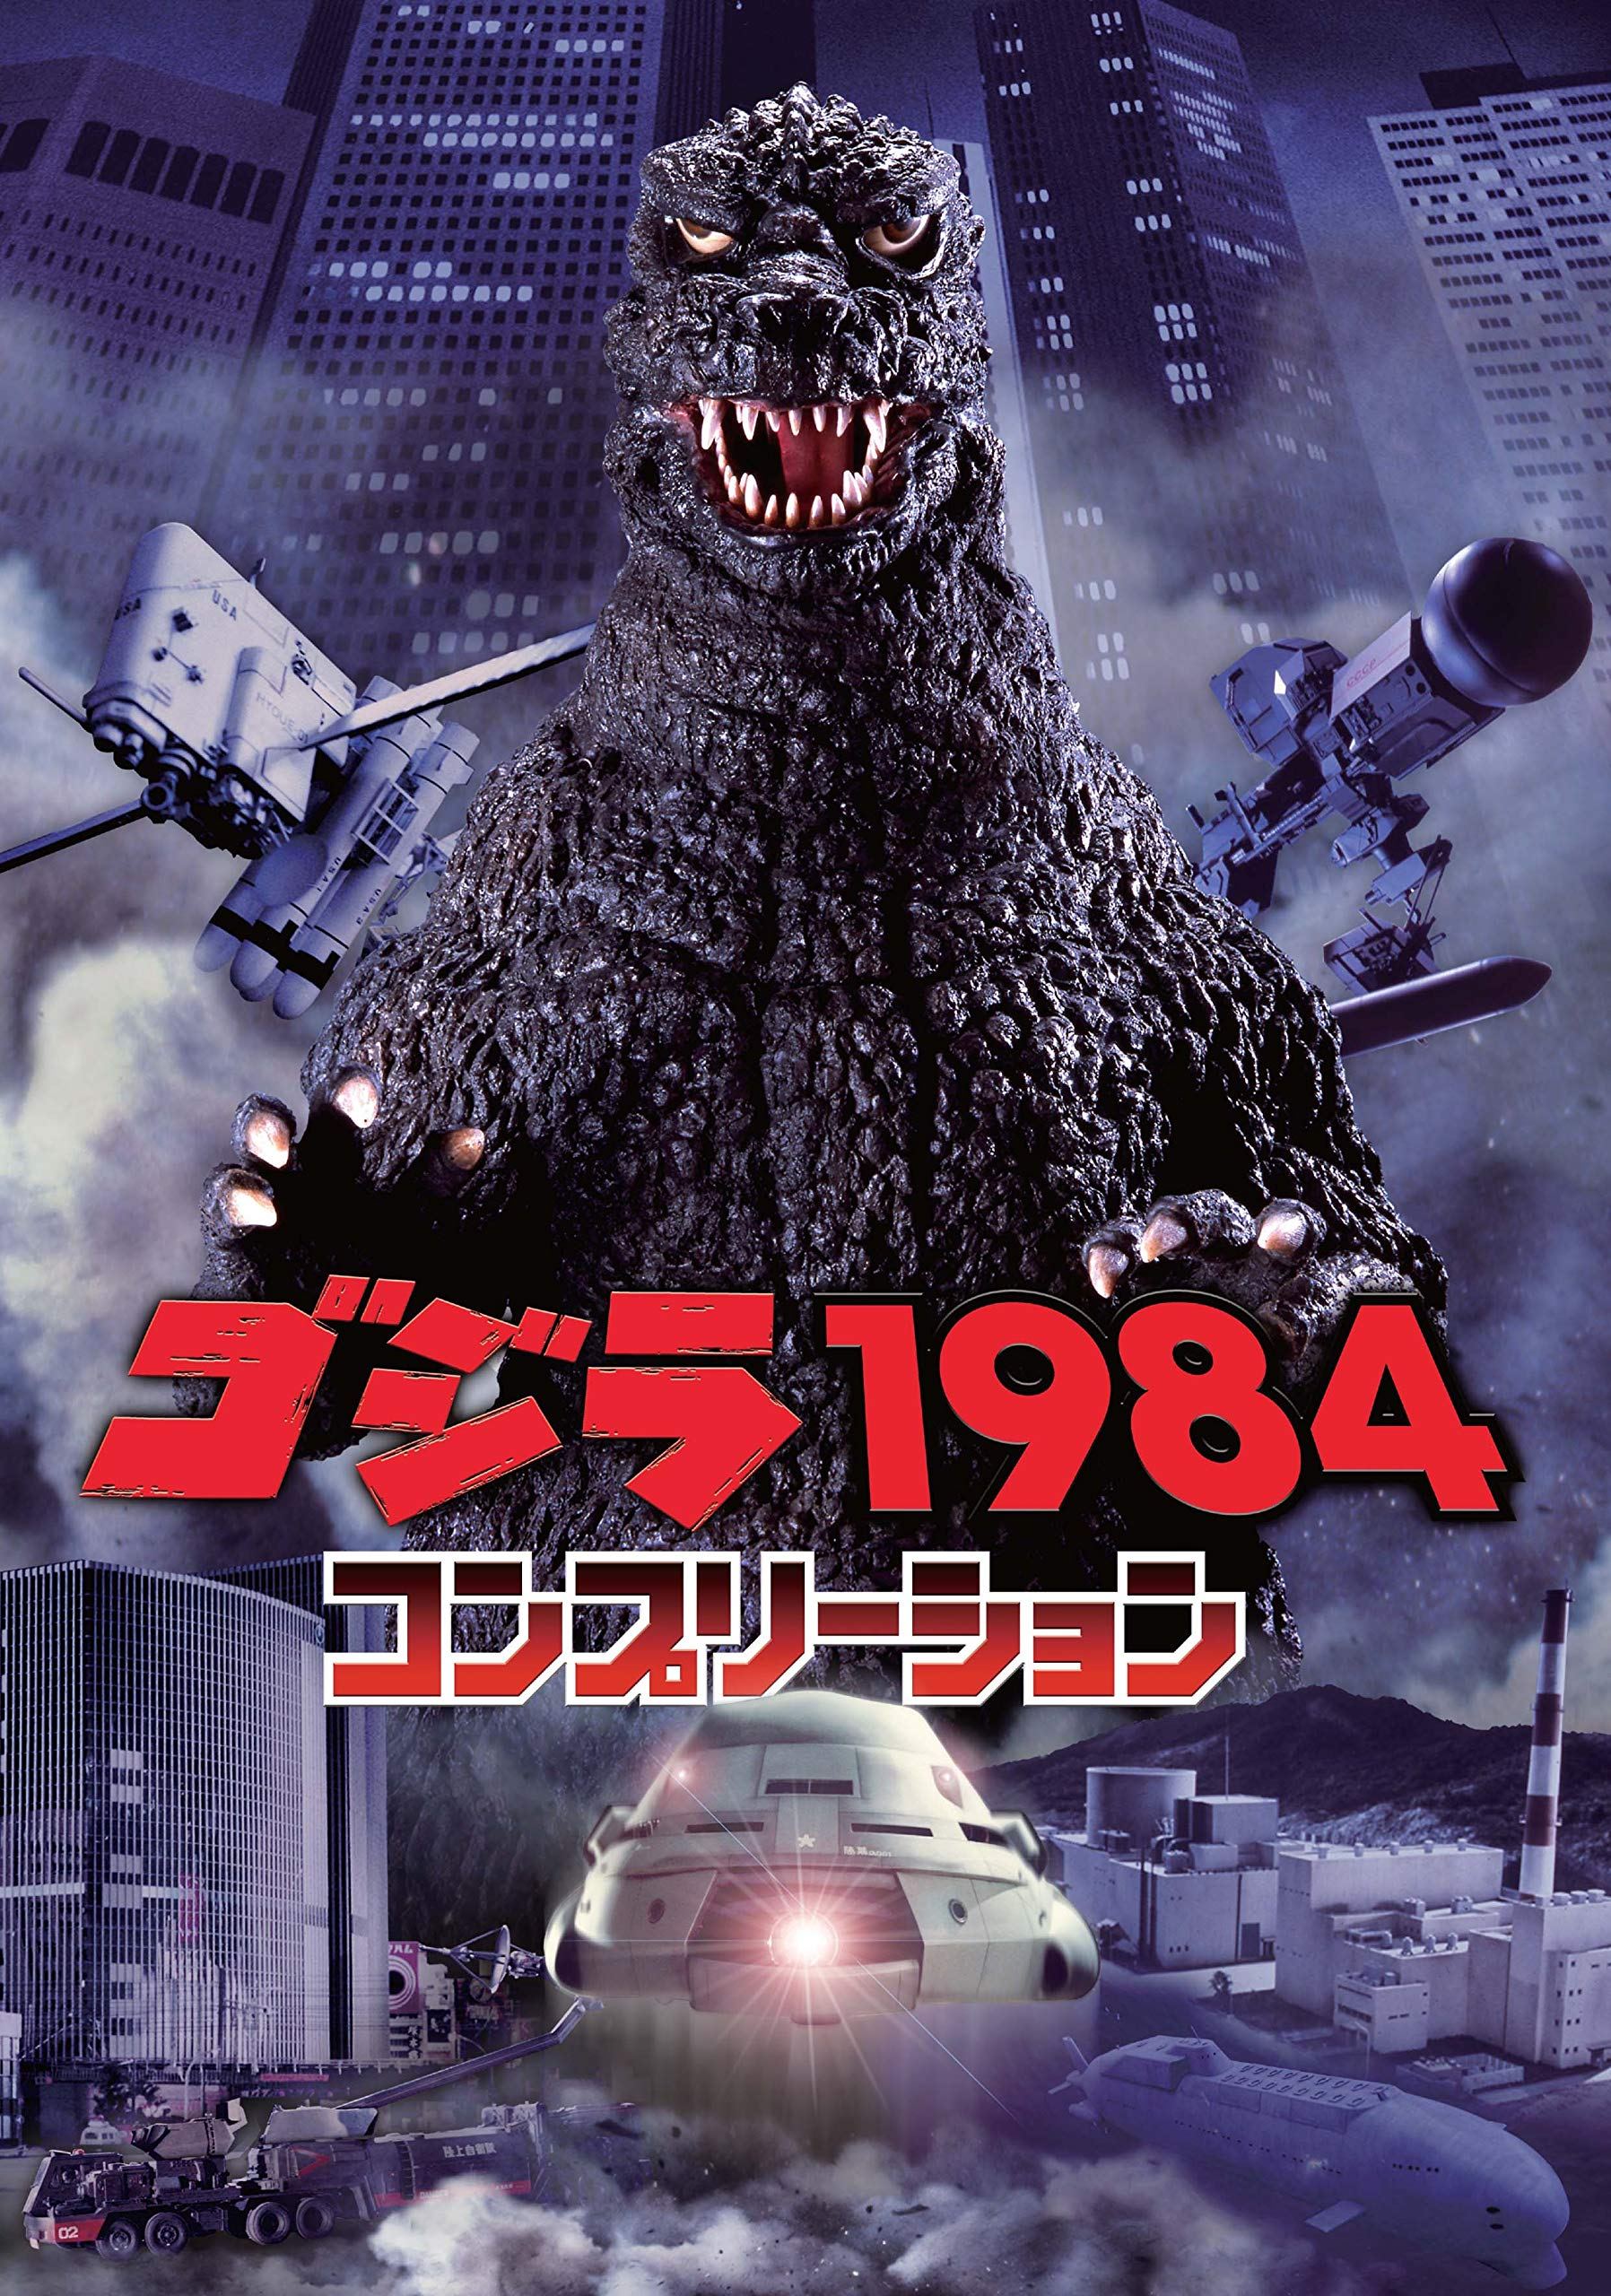 Godzilla 1984 Completion Book - Bitcoin & Lightning accepted